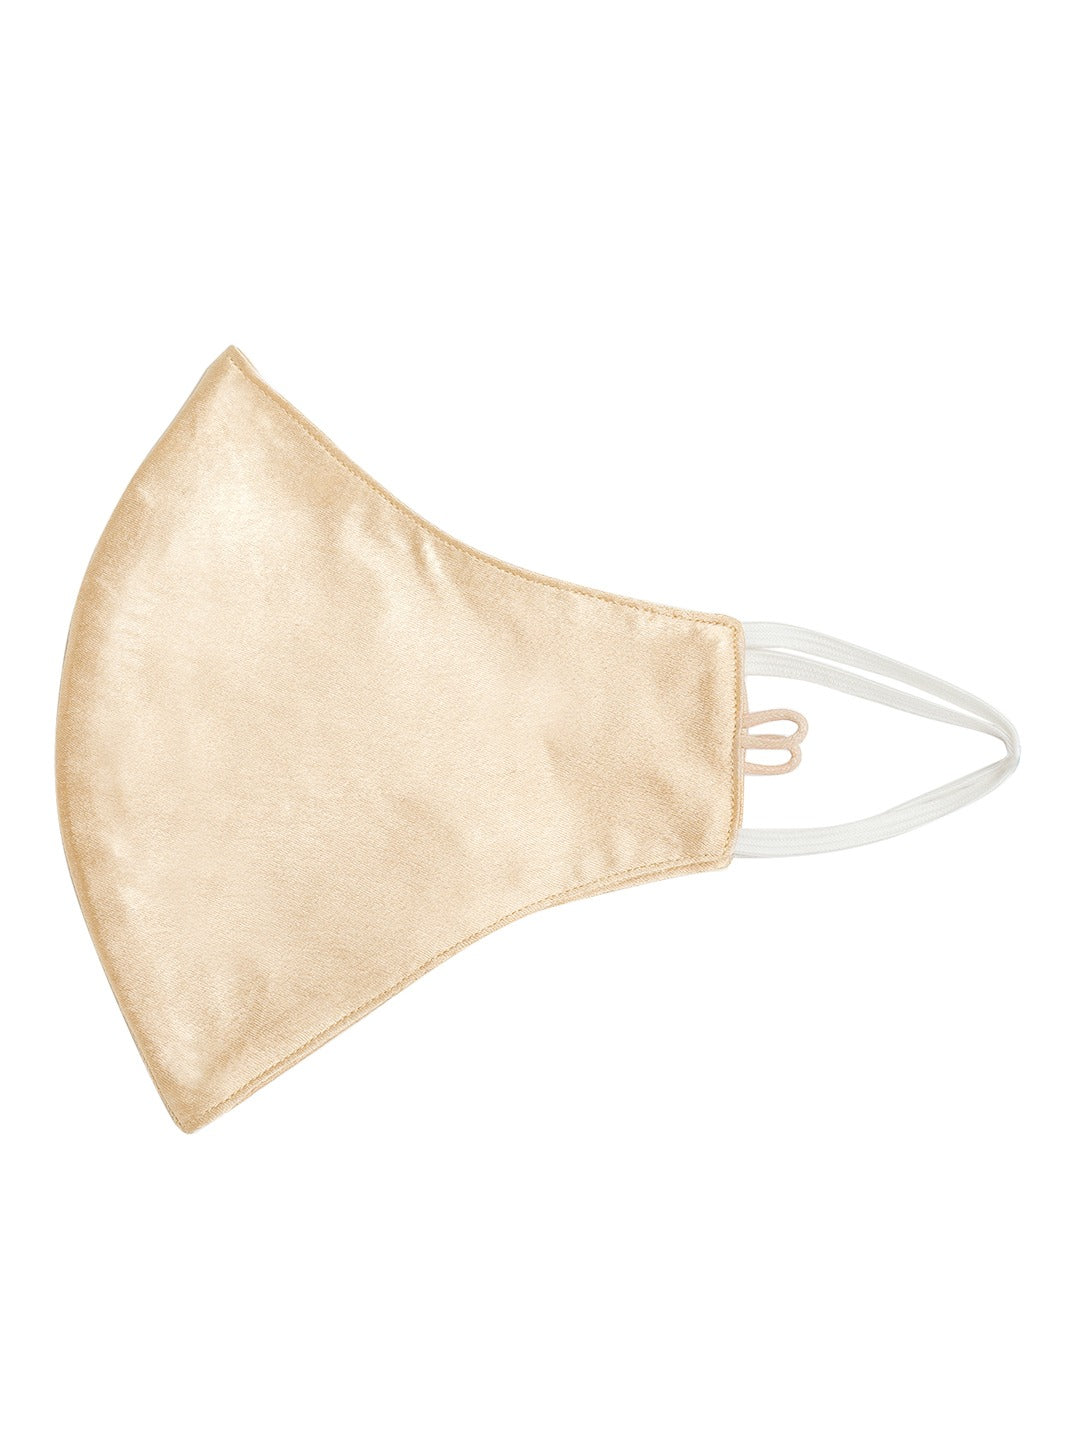 Blueberry gold Reusable 2-Ply satin face mask with double tone chain